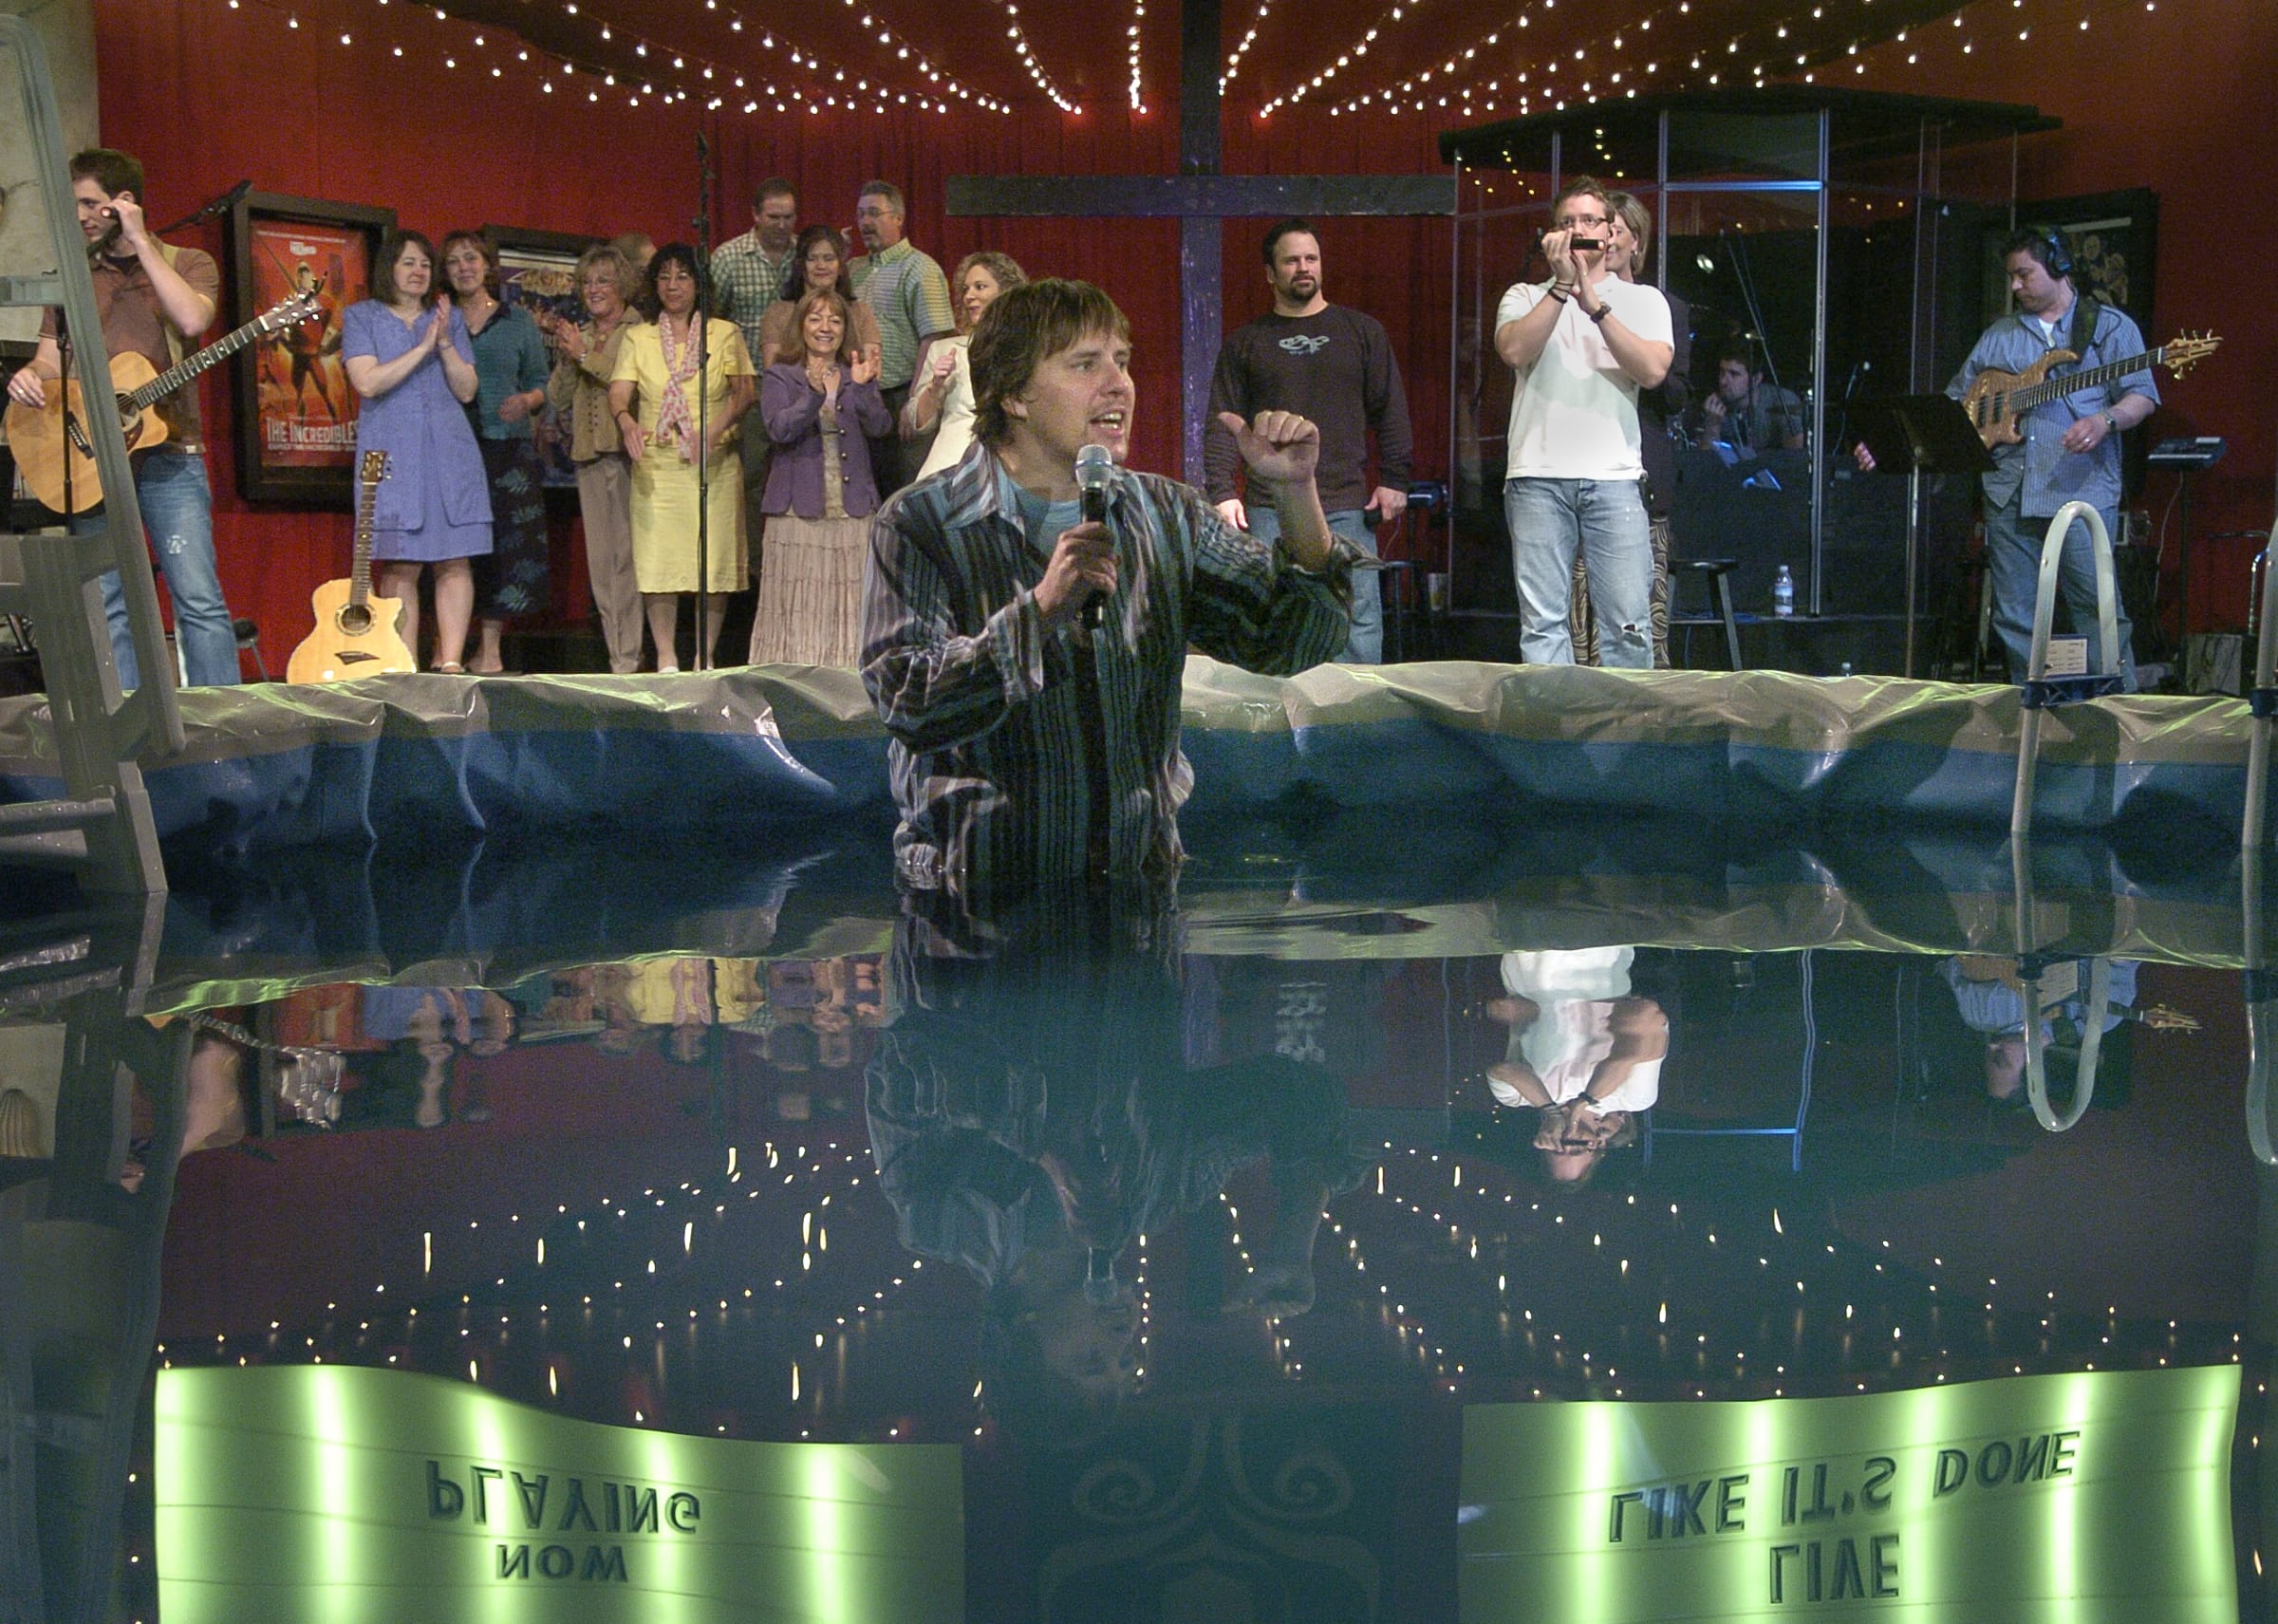 John Bishop, former pastor of the Living Hope Church, performs baptisms during Easter services in 2006.